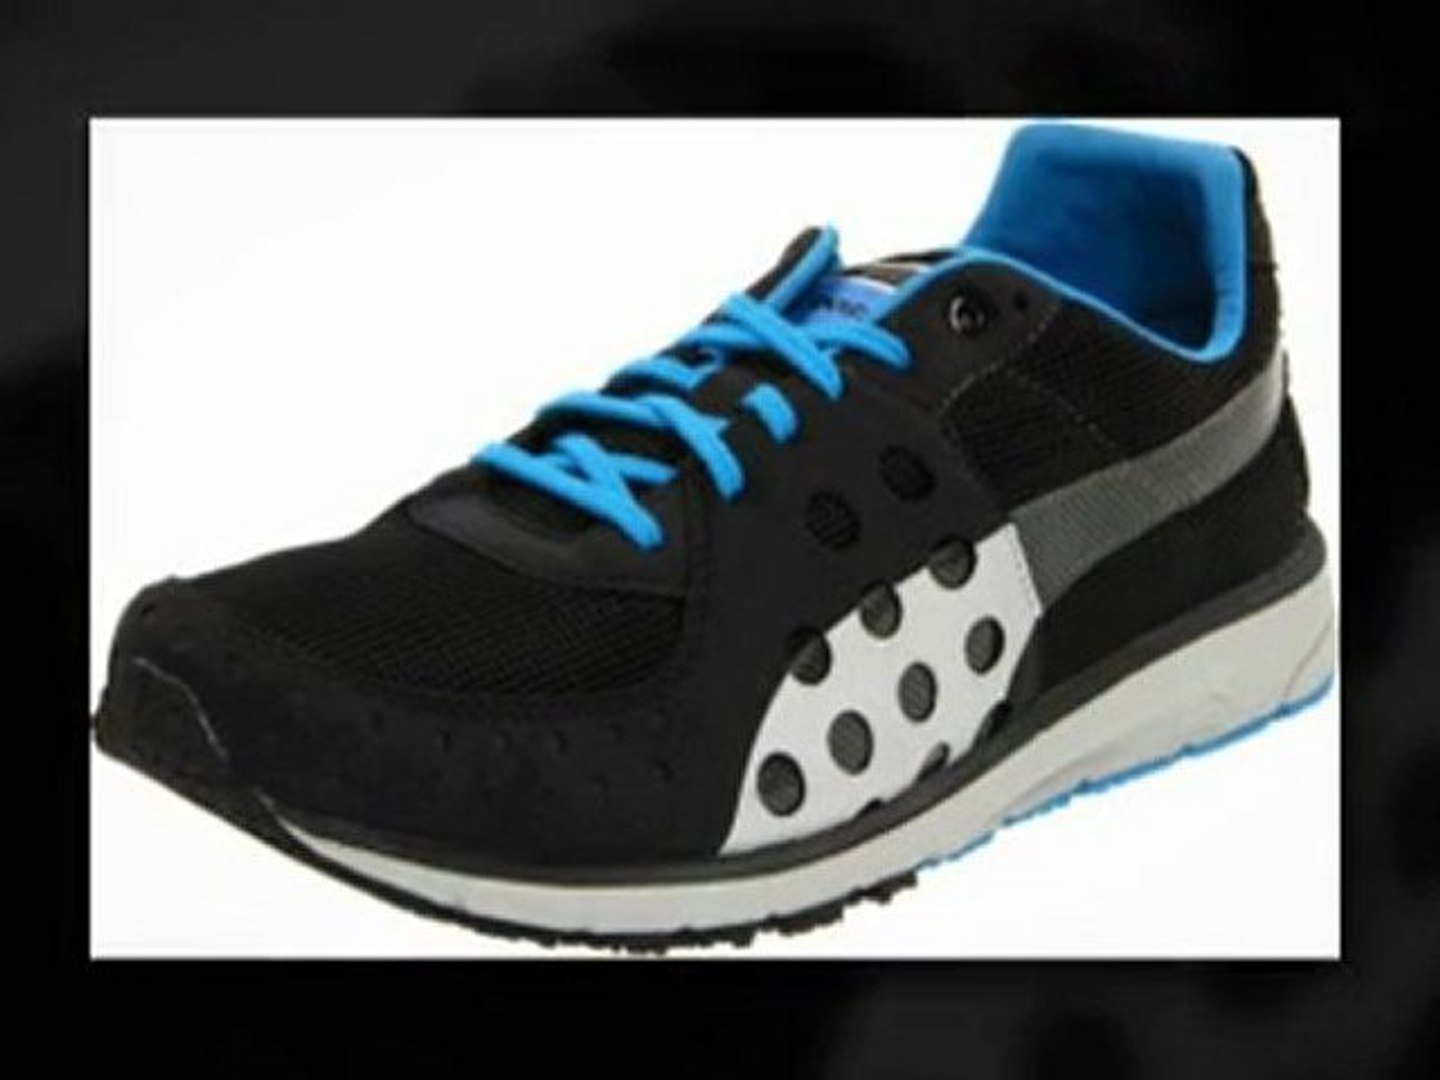 PUMA Faas 300 Running Sneaker - Best Price Review - video Dailymotion